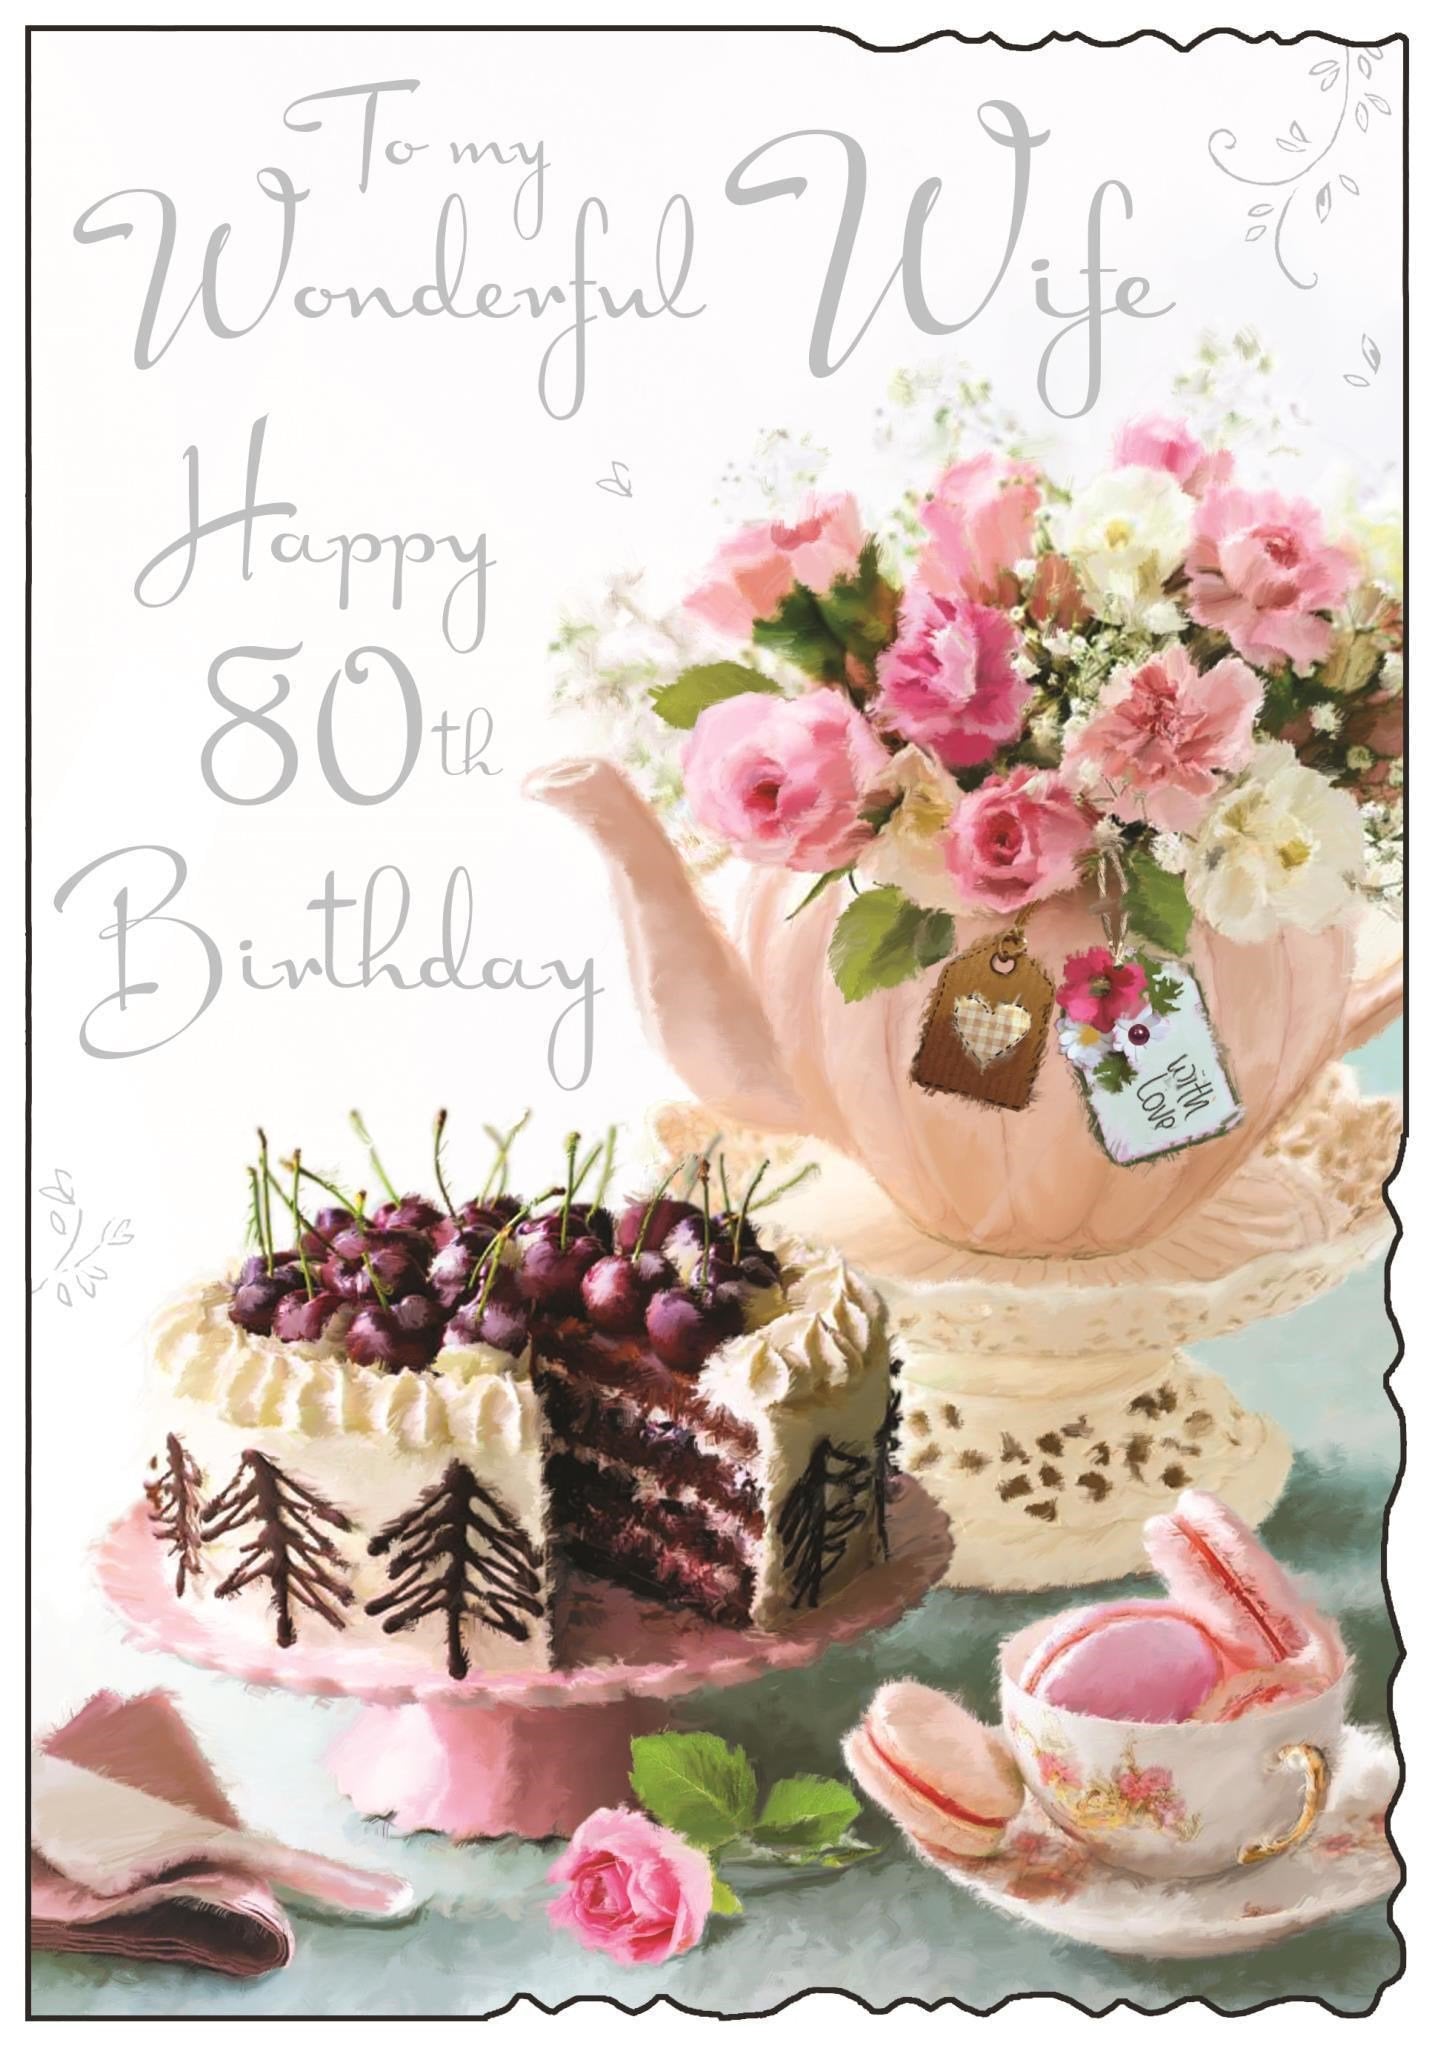 Front of Wife 80th Birthday Cake Greetings Card